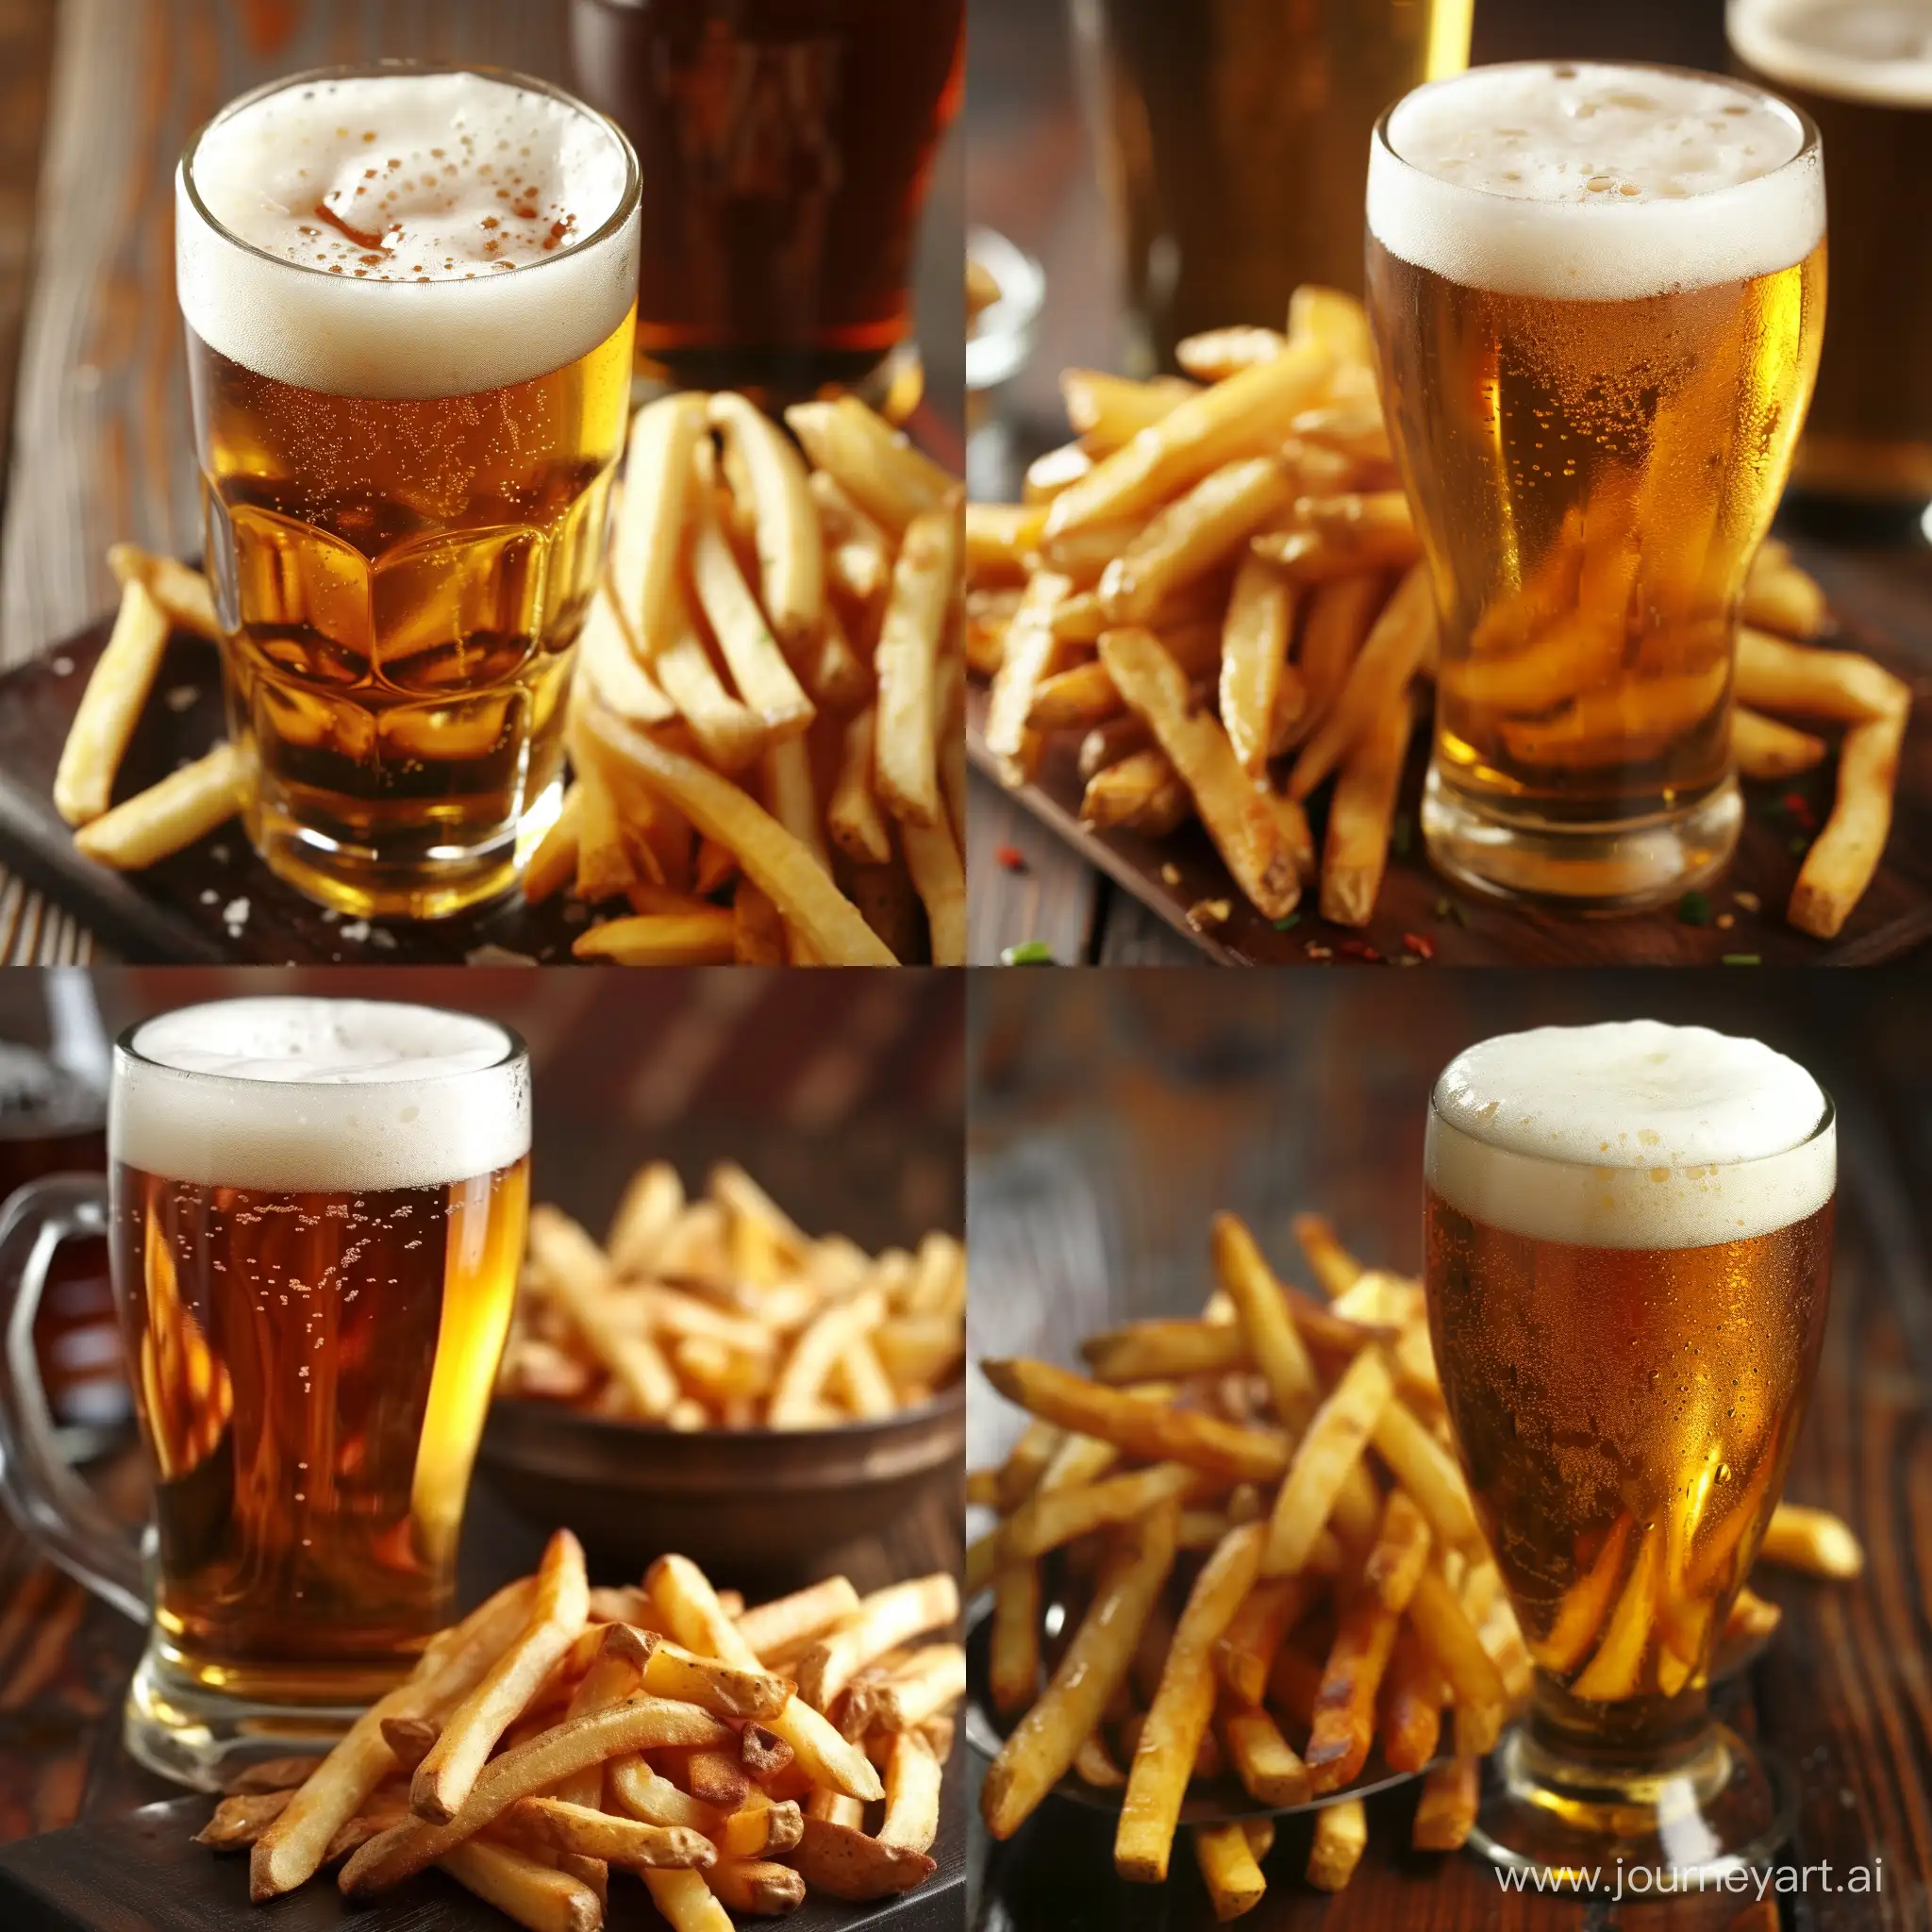 Golden-Beer-and-Crispy-French-Fries-Delight